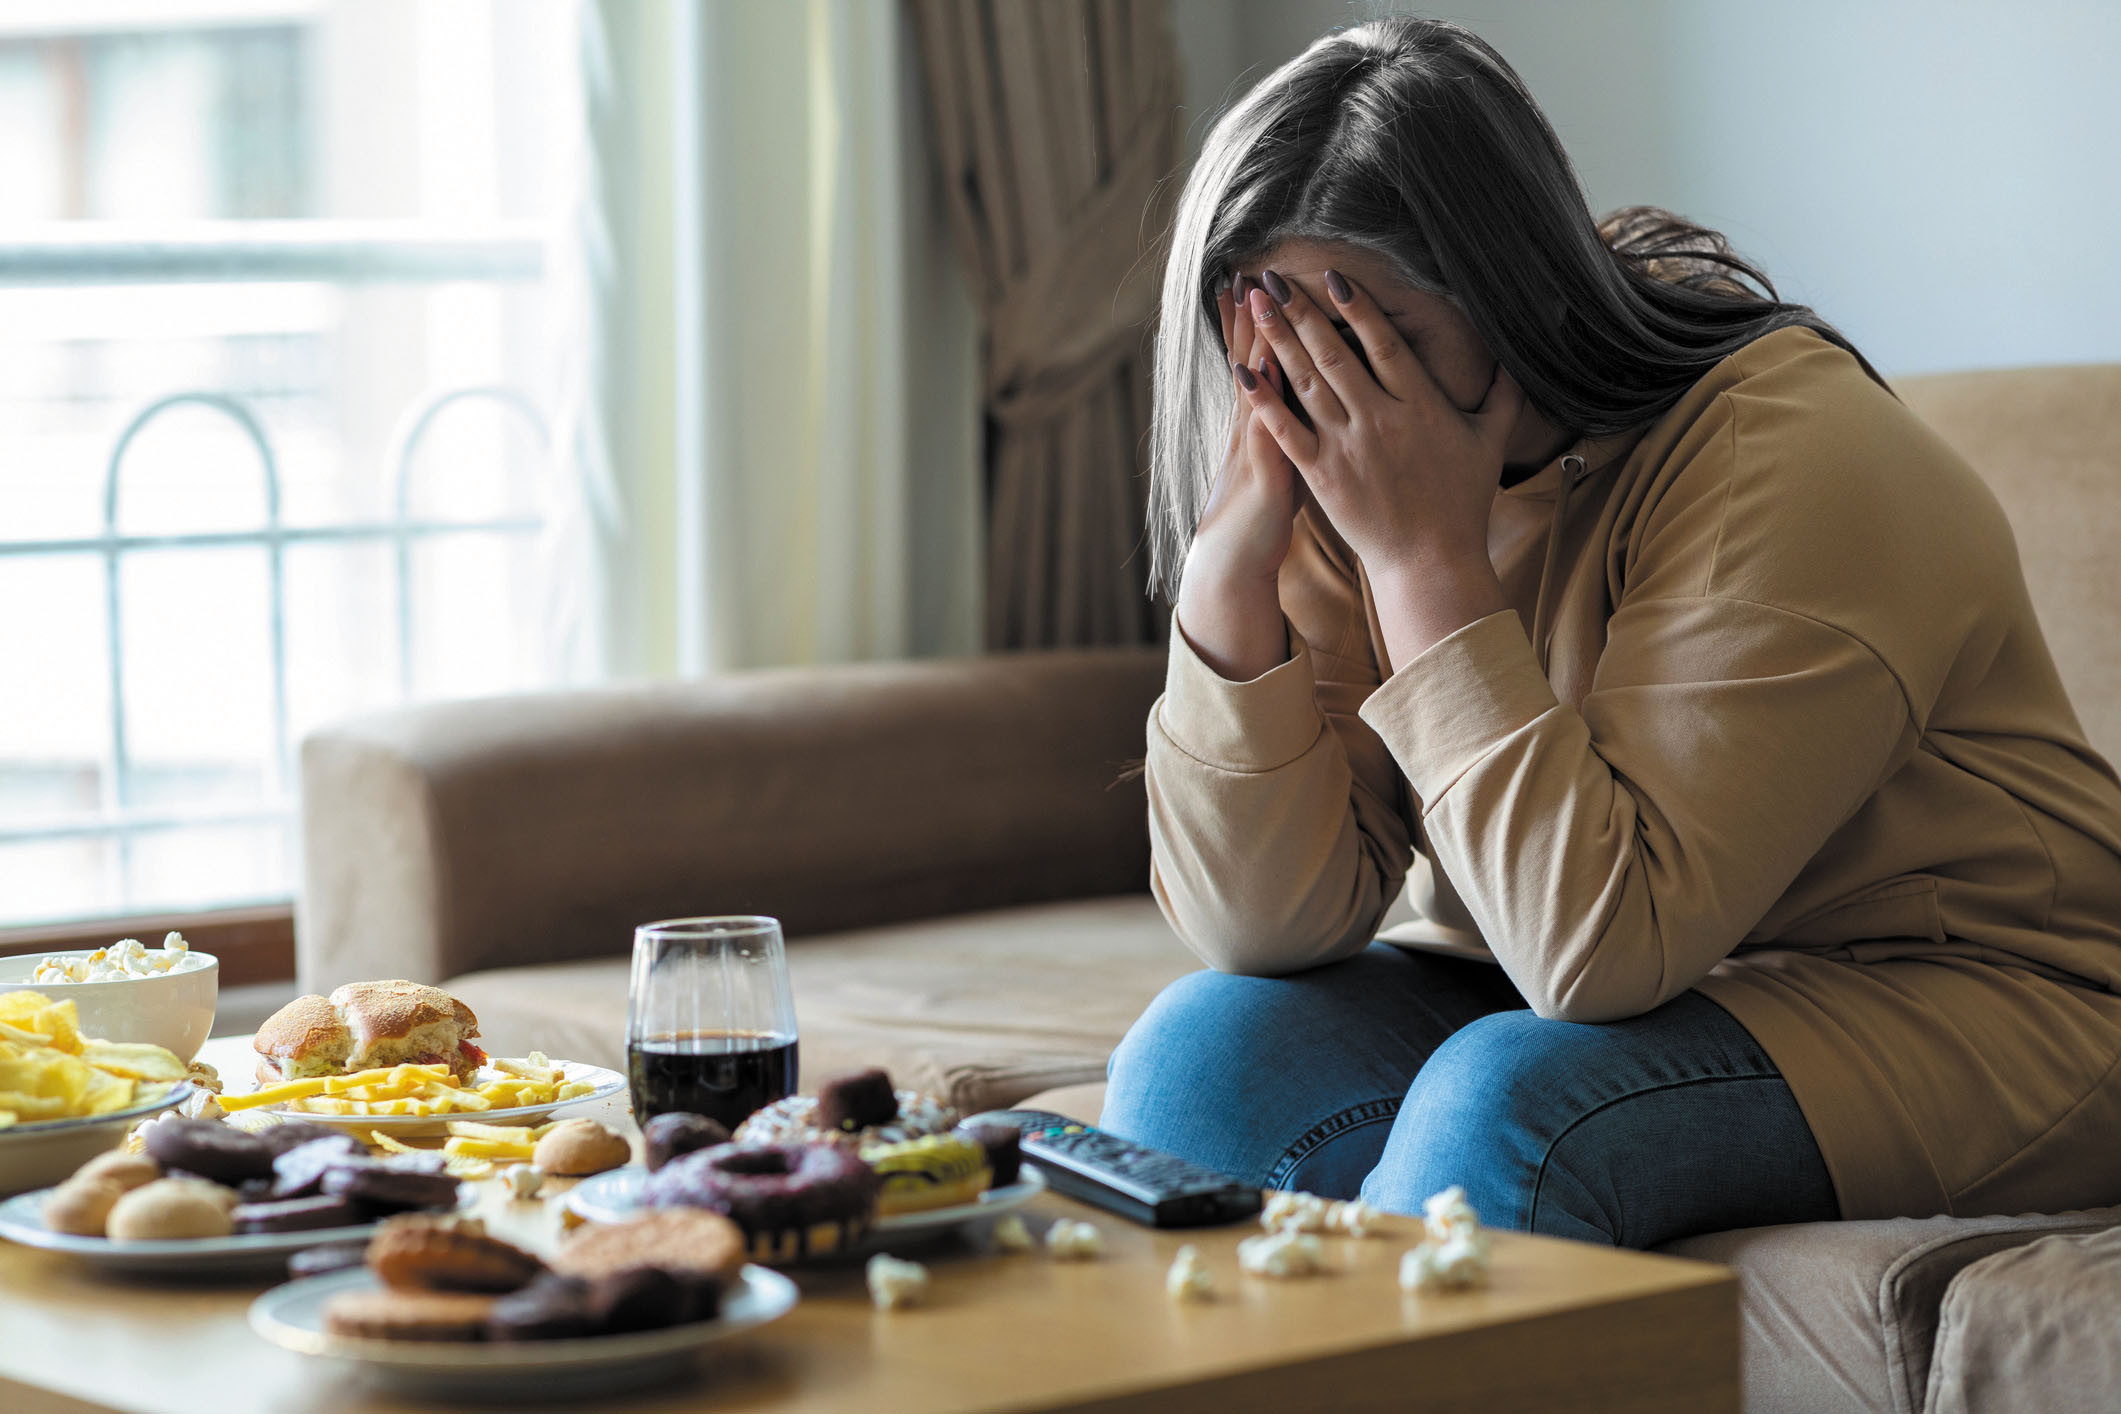 photo of a woman sitting on a couch holding her head in her hands with a spread of food on the coffee table in front of her